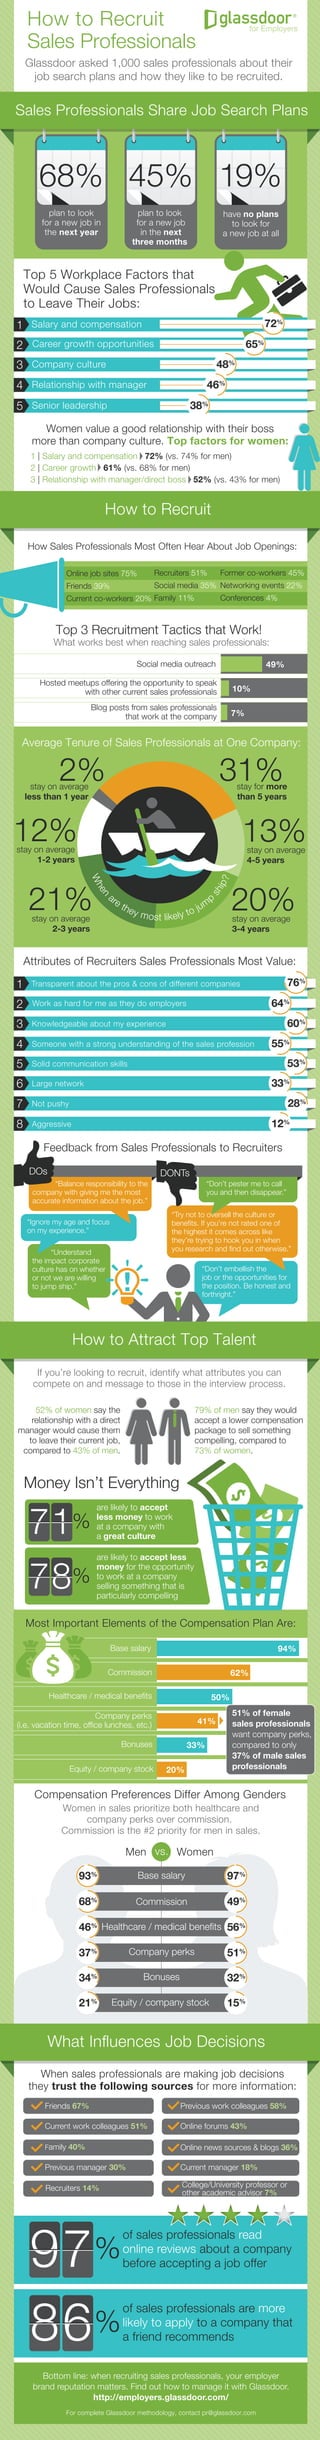 How to Recruit
Sales Professionals
Glassdoor asked 1,000 sales professionals about their
job search plans and how they like to be recruited.
68%
plan to look
for a new job in
the next year
45%
plan to look
for a new job
in the next
three months
19%
have no plans
to look for
a new job at all
Top 5 Workplace Factors that
Would Cause Sales Professionals
to Leave Their Jobs:
1
2
3
Transparent about the pros & cons of different companies
Work as hard for me as they do employers
Knowledgeable about my experience
76%
64%
60%
5 Solid communication skills
6 Large network 33%
7 Not pushy 28%
8 Aggressive 12%
4 Someone with a strong understanding of the sales profession 55%
Top 3 Recruitment Tactics that Work!
Attributes of Recruiters Sales Professionals Most Value:
What works best when reaching sales professionals:
Feedback from Sales Professionals to Recruiters
If you’re looking to recruit, identify what attributes you can
compete on and message to those in the interview process.
Money Isn’t Everything
When sales professionals are making job decisions
they trust the following sources for more information:
97%
Friends 67%
Current work colleagues 51%
Family 40%
of sales professionals read
online reviews about a company
before accepting a job offer
86%
of sales professionals are more
likely to apply to a company that
a friend recommends
Previous work colleagues 58%
Online forums 43%
Online news sources & blogs 36%
Previous manager 30% Current manager 18%
Recruiters 14%
Bottom line: when recruiting sales professionals, your employer
brand reputation matters. Find out how to manage it with Glassdoor.
http://employers.glassdoor.com/
For complete Glassdoor methodology, contact pr@glassdoor.com
Hosted meetups offering the opportunity to speak
with other current sales professionals
Blog posts from sales professionals
that work at the company
10%
Social media outreach 49%
7%
53%
71%
are likely to accept
less money to work
at a company with
a great culture
are likely to accept less
money for the opportunity
to work at a company
selling something that is
particularly compelling
78%
Sales Professionals Share Job Search Plans
Average Tenure of Sales Professionals at One Company:
31%
13%
20%21%
12%
2% stay for more
than 5 years
stay on average
less than 1 year
stay on average
4-5 years
stay on average
3-4 years
stay on average
2-3 years
stay on average
1-2 years
“Understand
the impact corporate
culture has on whether
or not we are willing
to jump ship.”
“Ignore my age and focus
on my experience.”
“Don’t embellish the
job or the opportunities for
the position. Be honest and
forthright.”
“Balance responsibility to the
company with giving me the most
accurate information about the job.”
DOs
“Don’t pester me to call
you and then disappear.”
DONTs
“Try not to oversell the culture or
beneﬁts. If you’re not rated one of
the highest it comes across like
they’re trying to hook you in when
you research and ﬁnd out otherwise.”
When
are they most likely to jum
p
ship?
79% of men say they would
accept a lower compensation
package to sell something
compelling, compared to
73% of women.
52% of women say the
relationship with a direct
manager would cause them
to leave their current job,
compared to 43% of men.
Most Important Elements of the Compensation Plan Are:
Compensation Preferences Differ Among Genders
Commission
Company perks
(i.e. vacation time, ofﬁce lunches, etc.)
Healthcare / medical beneﬁts
Bonuses
Equity / company stock
62%
Base salary
50%
41%
33%
20%
94%
College/University professor or
other academic advisor 7%
How to Attract Top Talent
Men Women
Women in sales prioritize both healthcare and
company perks over commission.
Commission is the #2 priority for men in sales.
51% of female
sales professionals
want company perks,
compared to only
37% of male sales
professionals
What Inﬂuences Job Decisions
Women value a good relationship with their boss
more than company culture. Top factors for women:
21
2
3
Salary and compensation
Career growth opportunities
Company culture
65%
48%
4 Relationship with manager 46%
5 Senior leadership 38%
72%
How to Recruit
1 | Salary and compensation 72% (vs. 74% for men)
2 | Career growth 61% (vs. 68% for men)
3 | Relationship with manager/direct boss 52% (vs. 43% for men)
vs.
Healthcare / medical beneﬁts
Equity / company stock
93%
21%
46%
97%
15%
56%
Commission68% 49%
Company perks37% 51%
Bonuses34% 32%
Base salary
Online job sites 75%
Friends 39%
Current co-workers 20%
Recruiters 51%
Social media 35%
Family 11%
Former co-workers 45%
Networking events 22%
Conferences 4%
How Sales Professionals Most Often Hear About Job Openings:
 